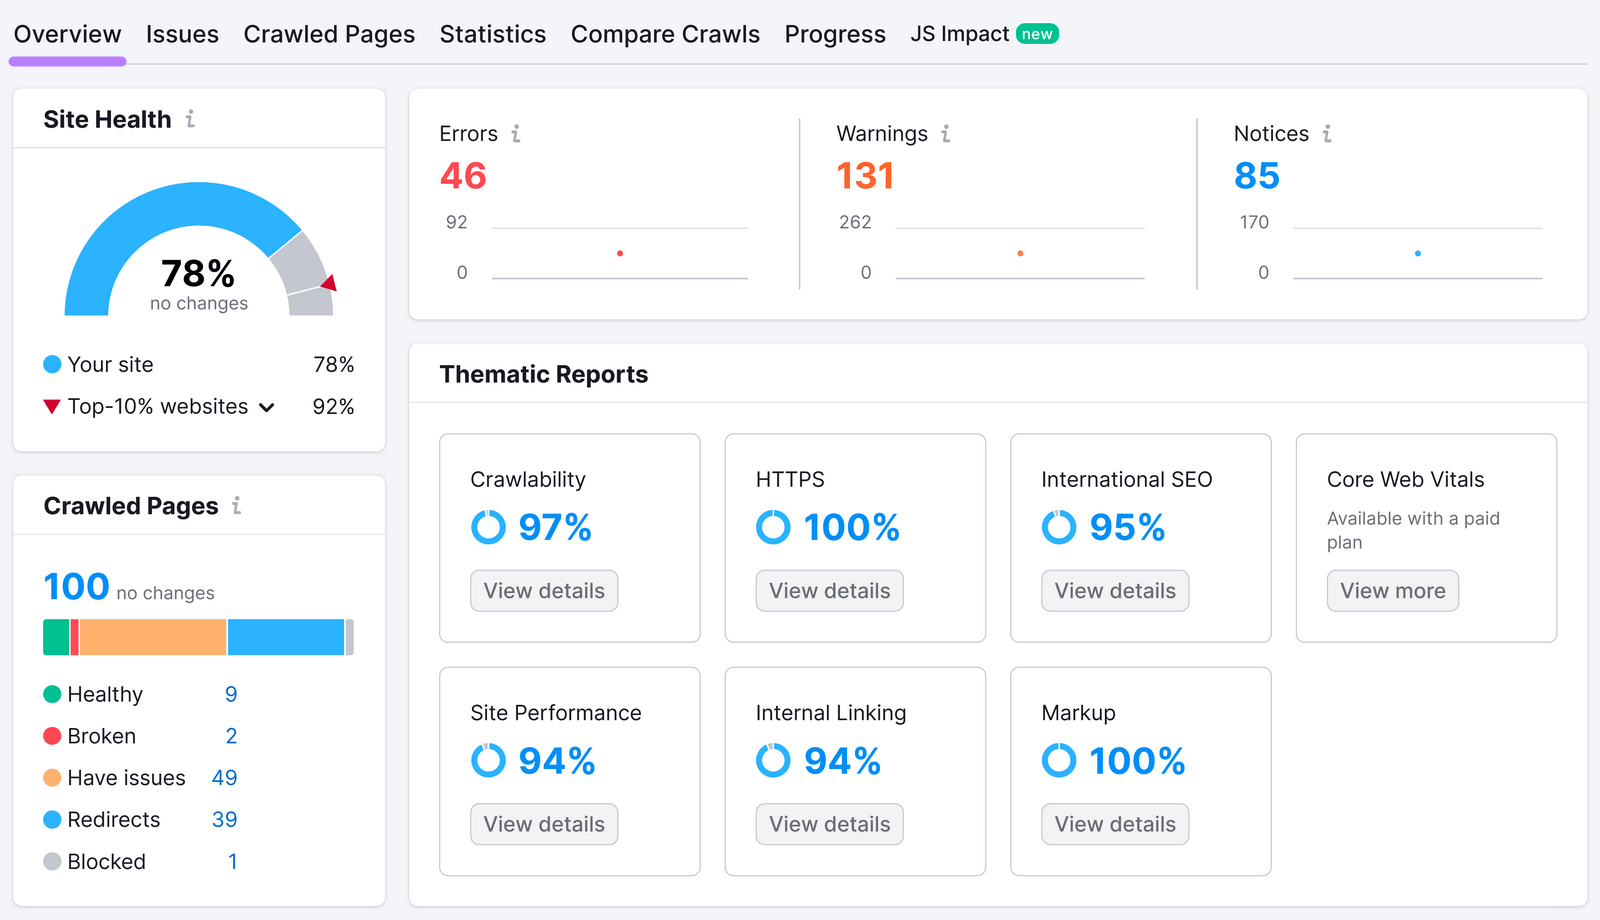 "Overview" dashboard is Site Audit tool